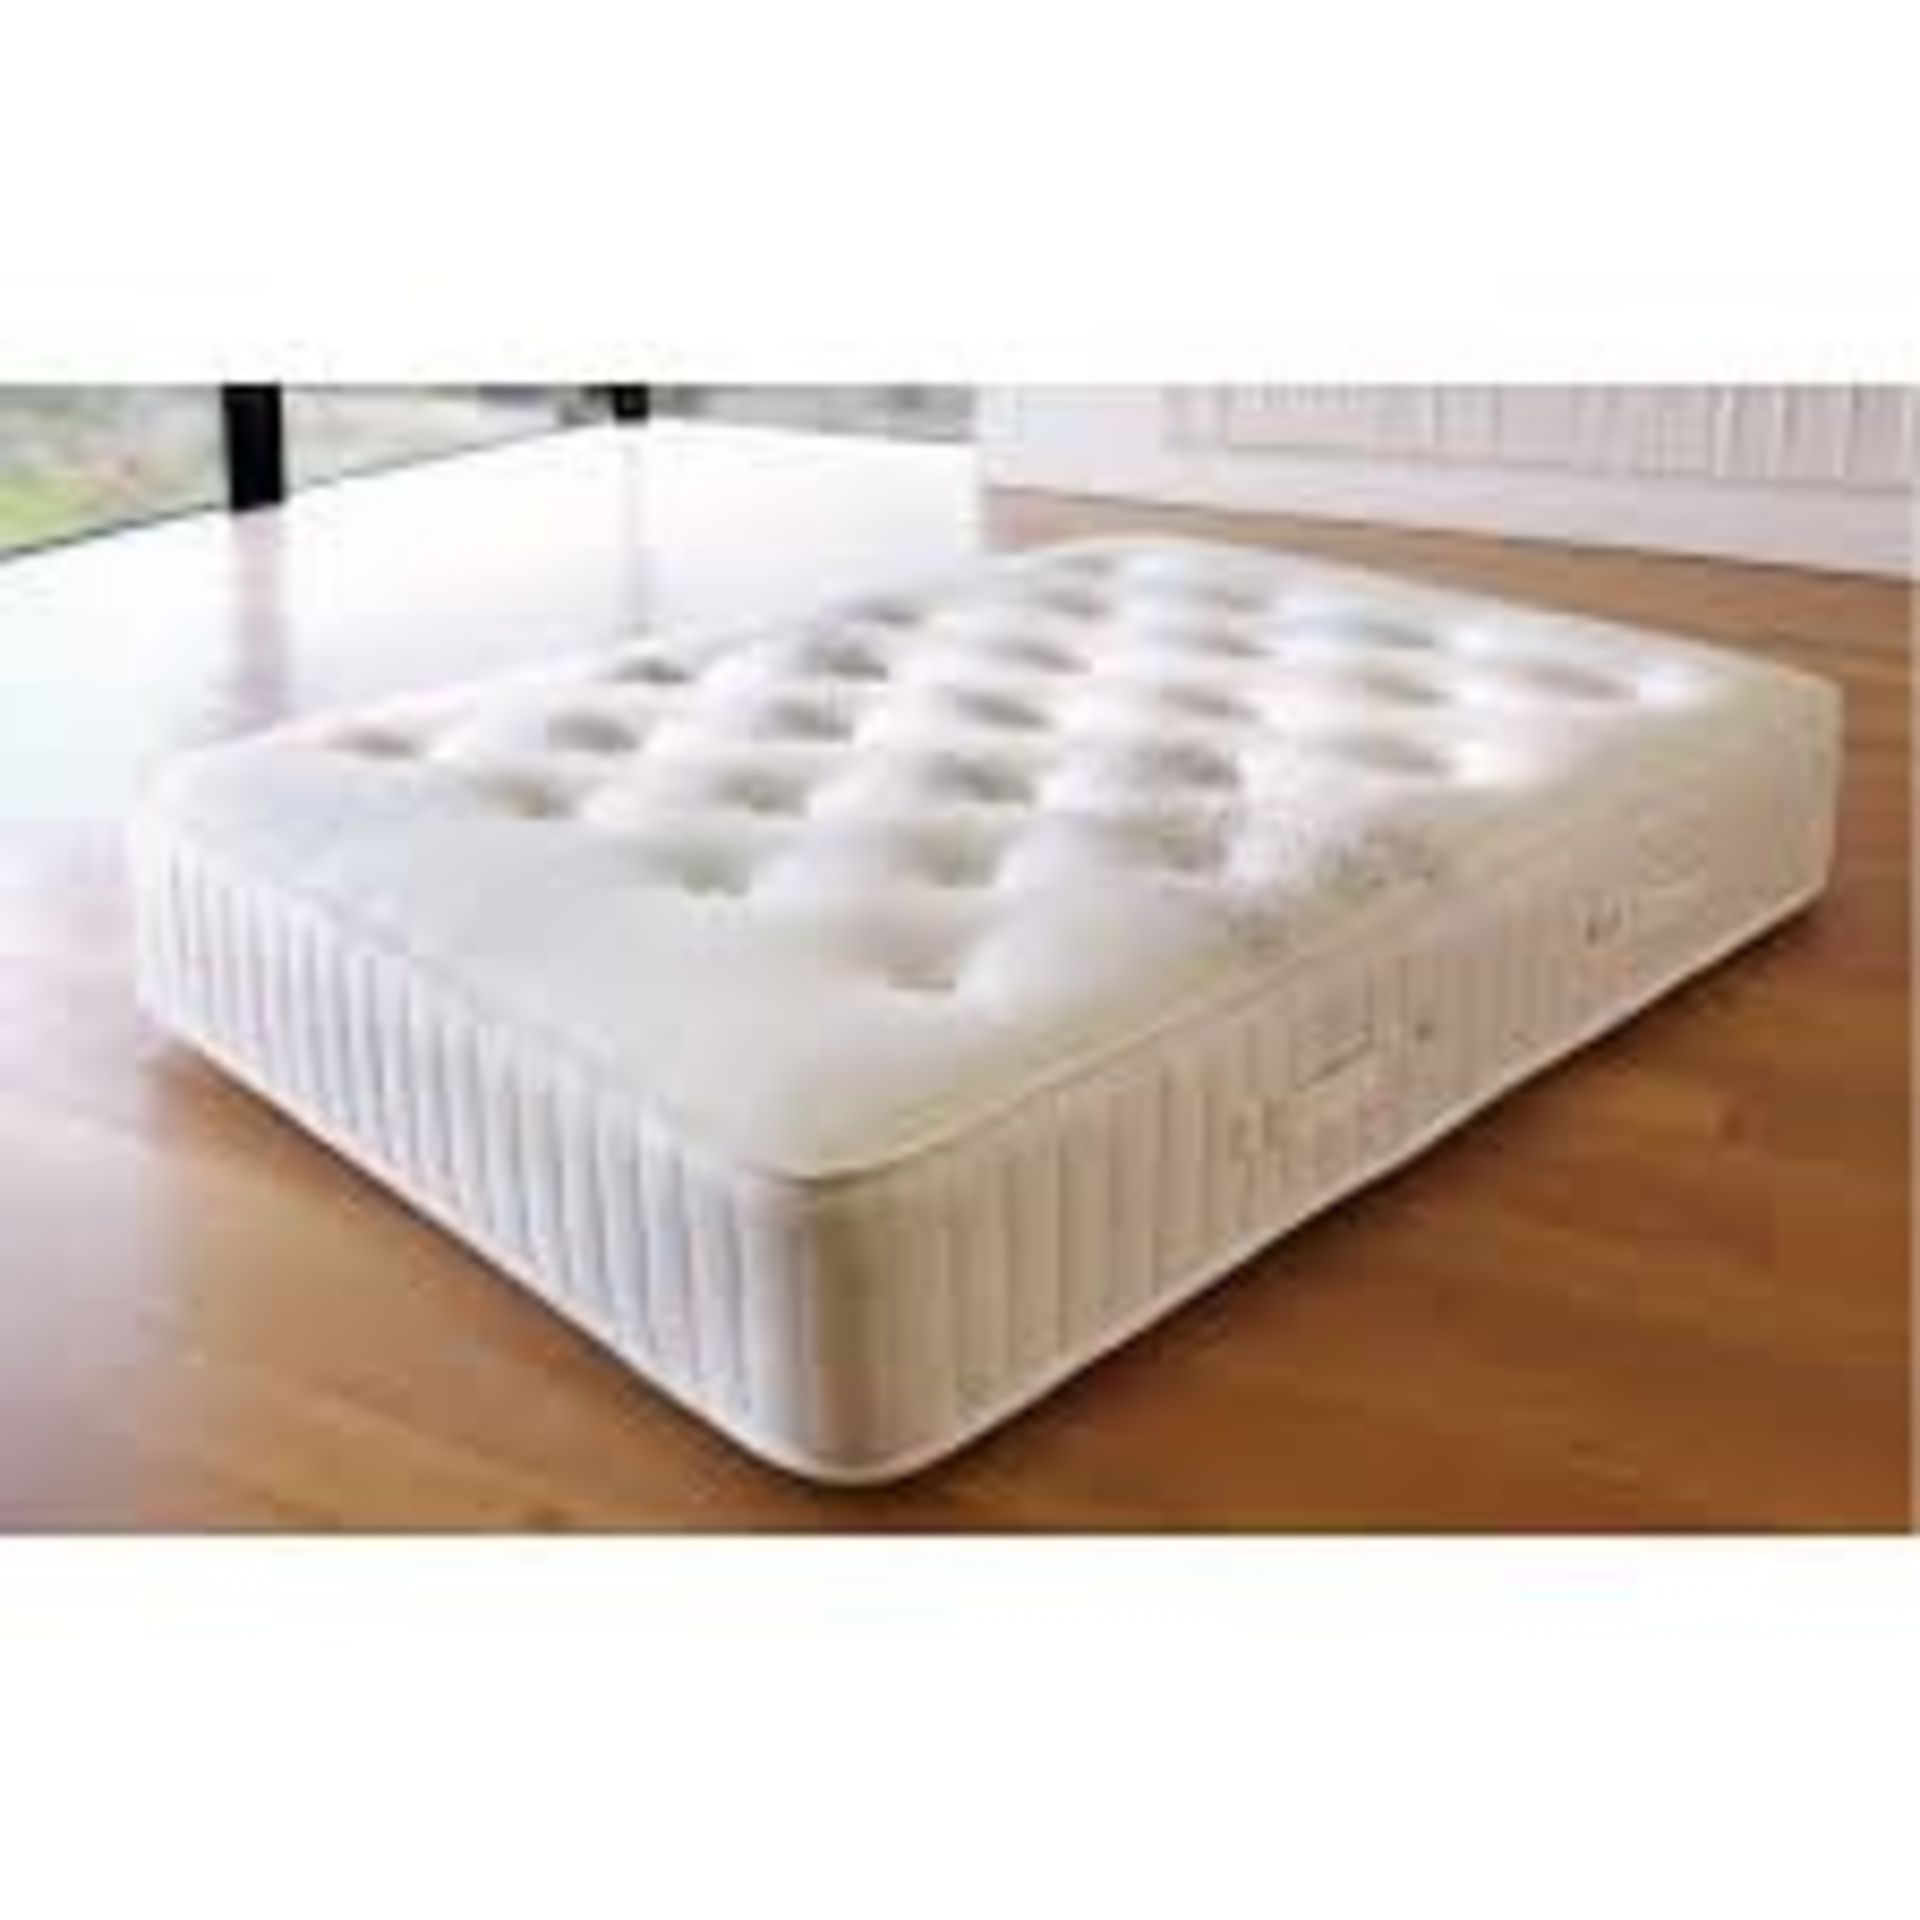 1 GRADE A BAGGED UNBRANDED LUXURY ALOE VERA POCKET SPRUNG MATTRESS / KING - 5FT / PICTURE IS JUST